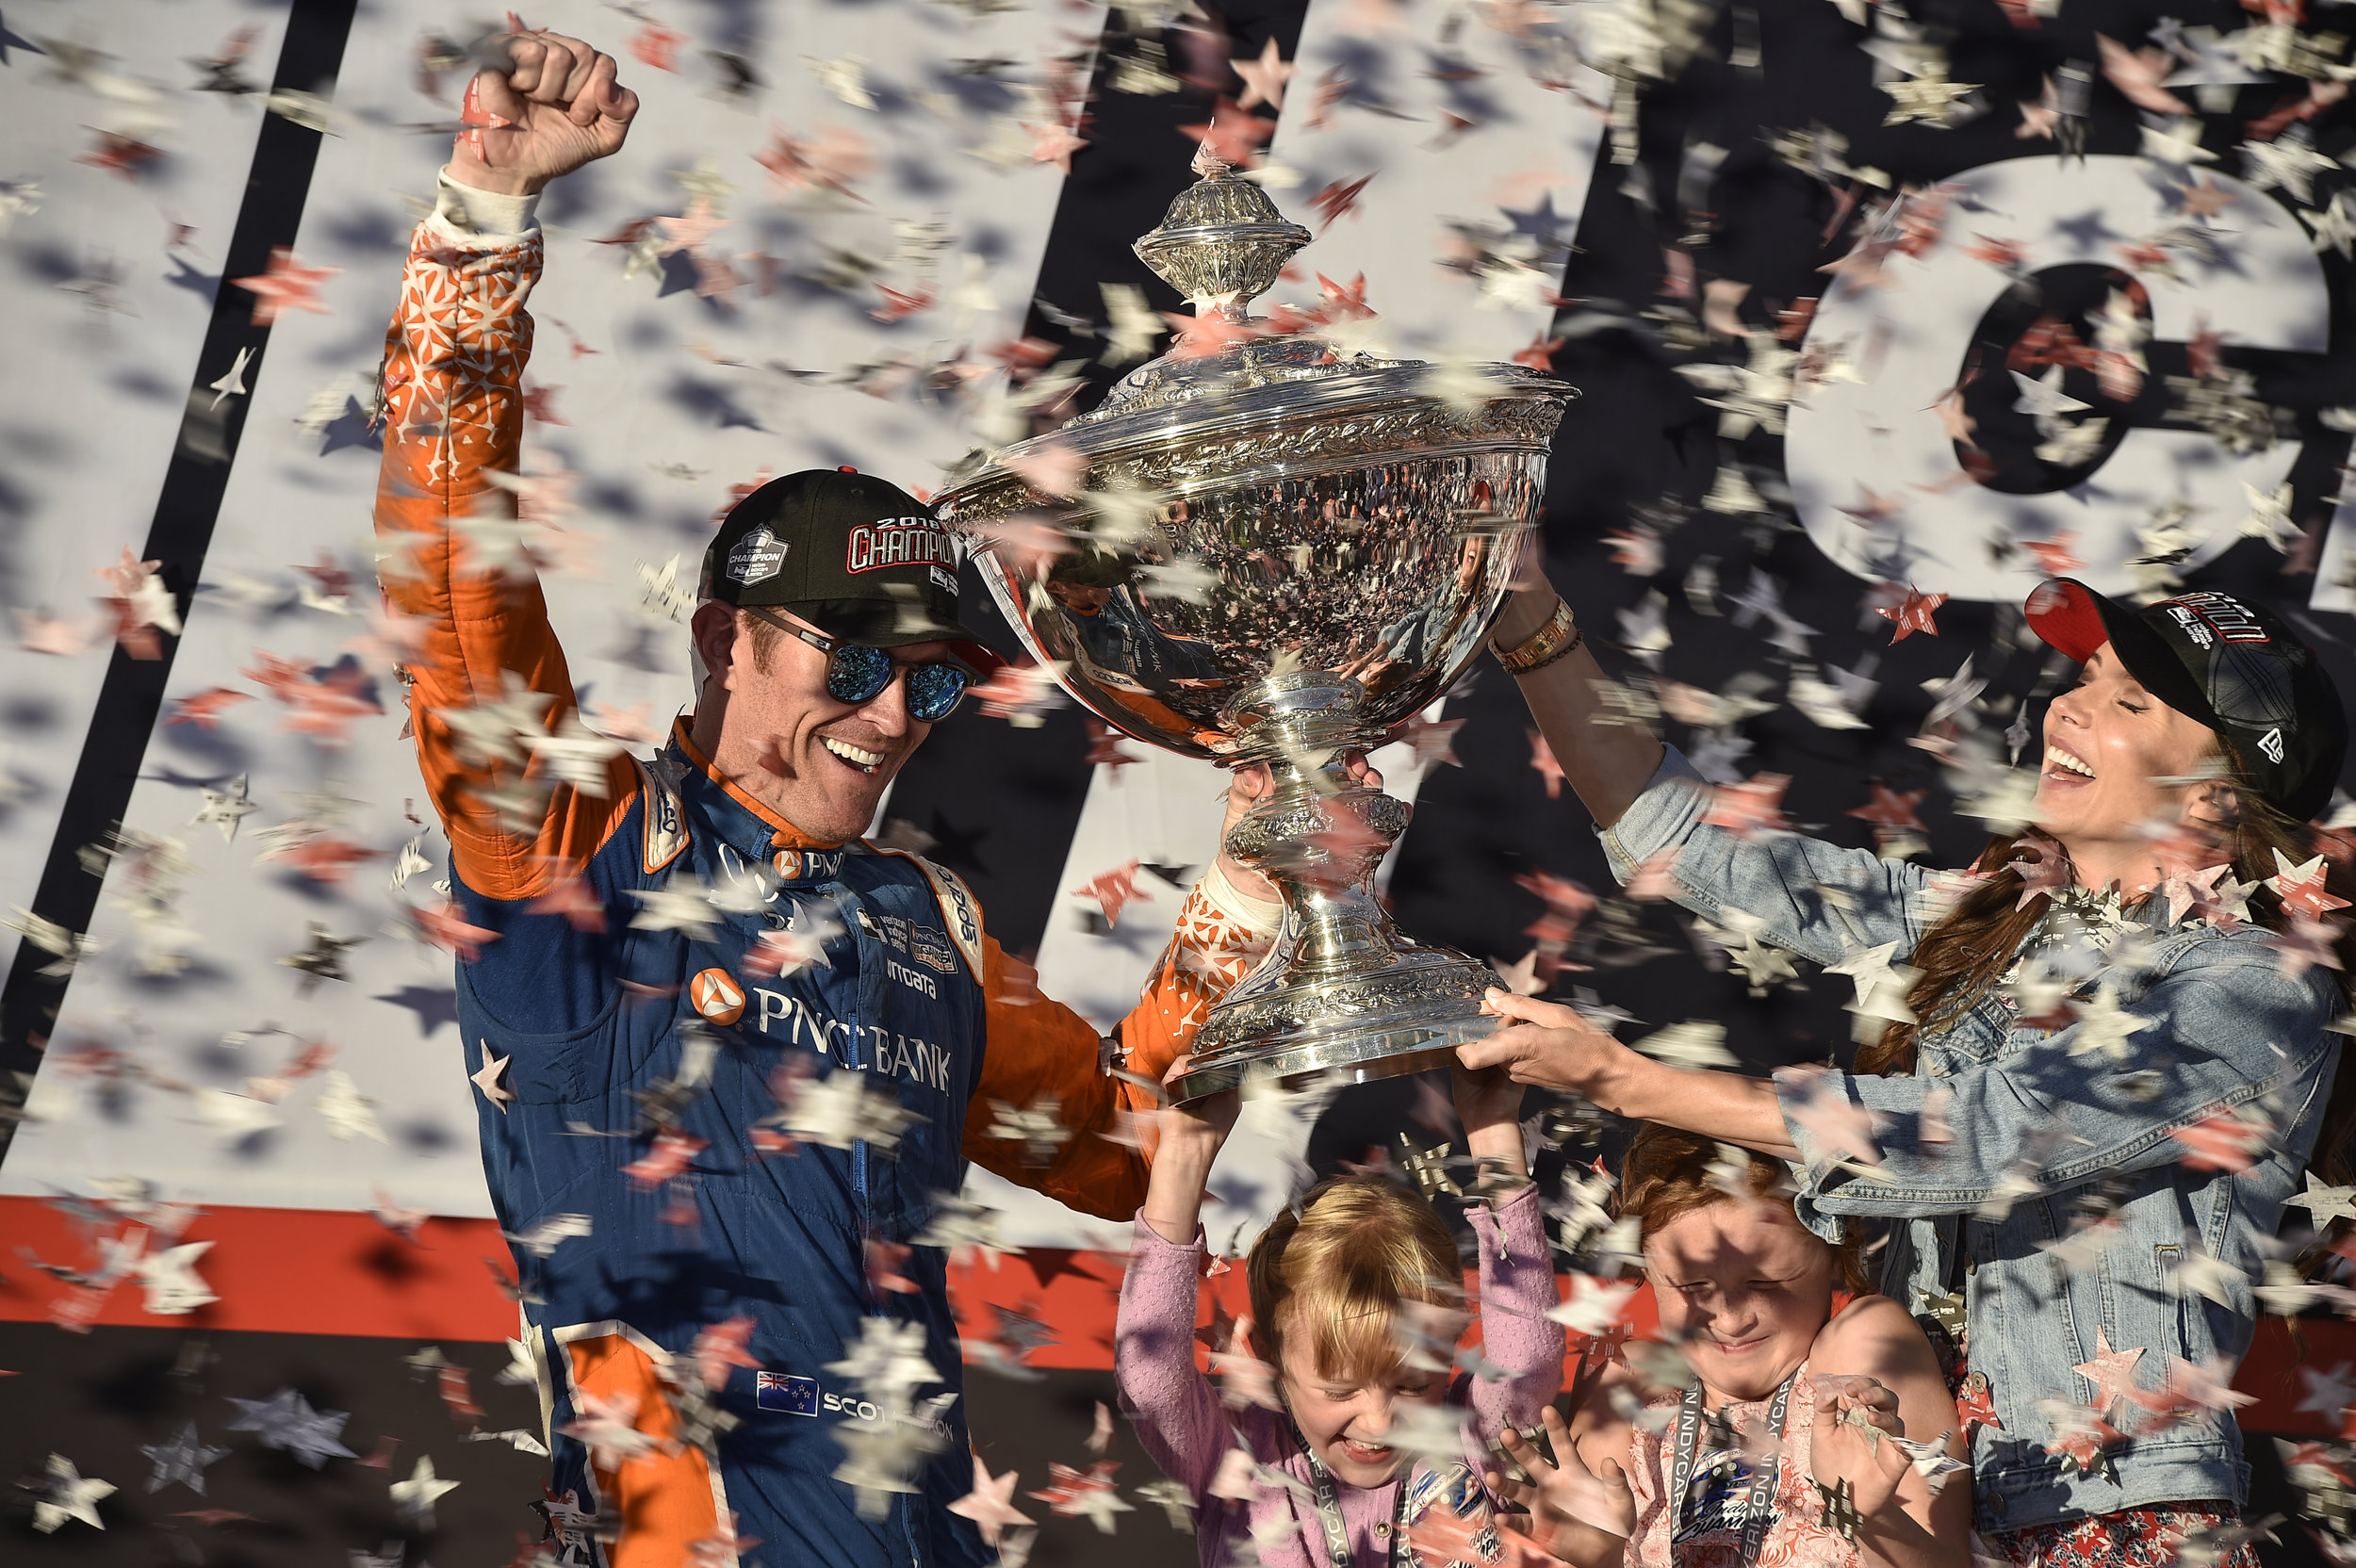  We build and wait the entire year for this moment. Drivers, crew members and engineers focus every second of every race for this opportunity to undisputedly claim they are the best. Scott Dixon – Car 9 crew, 2018 IndyCar series champions. 